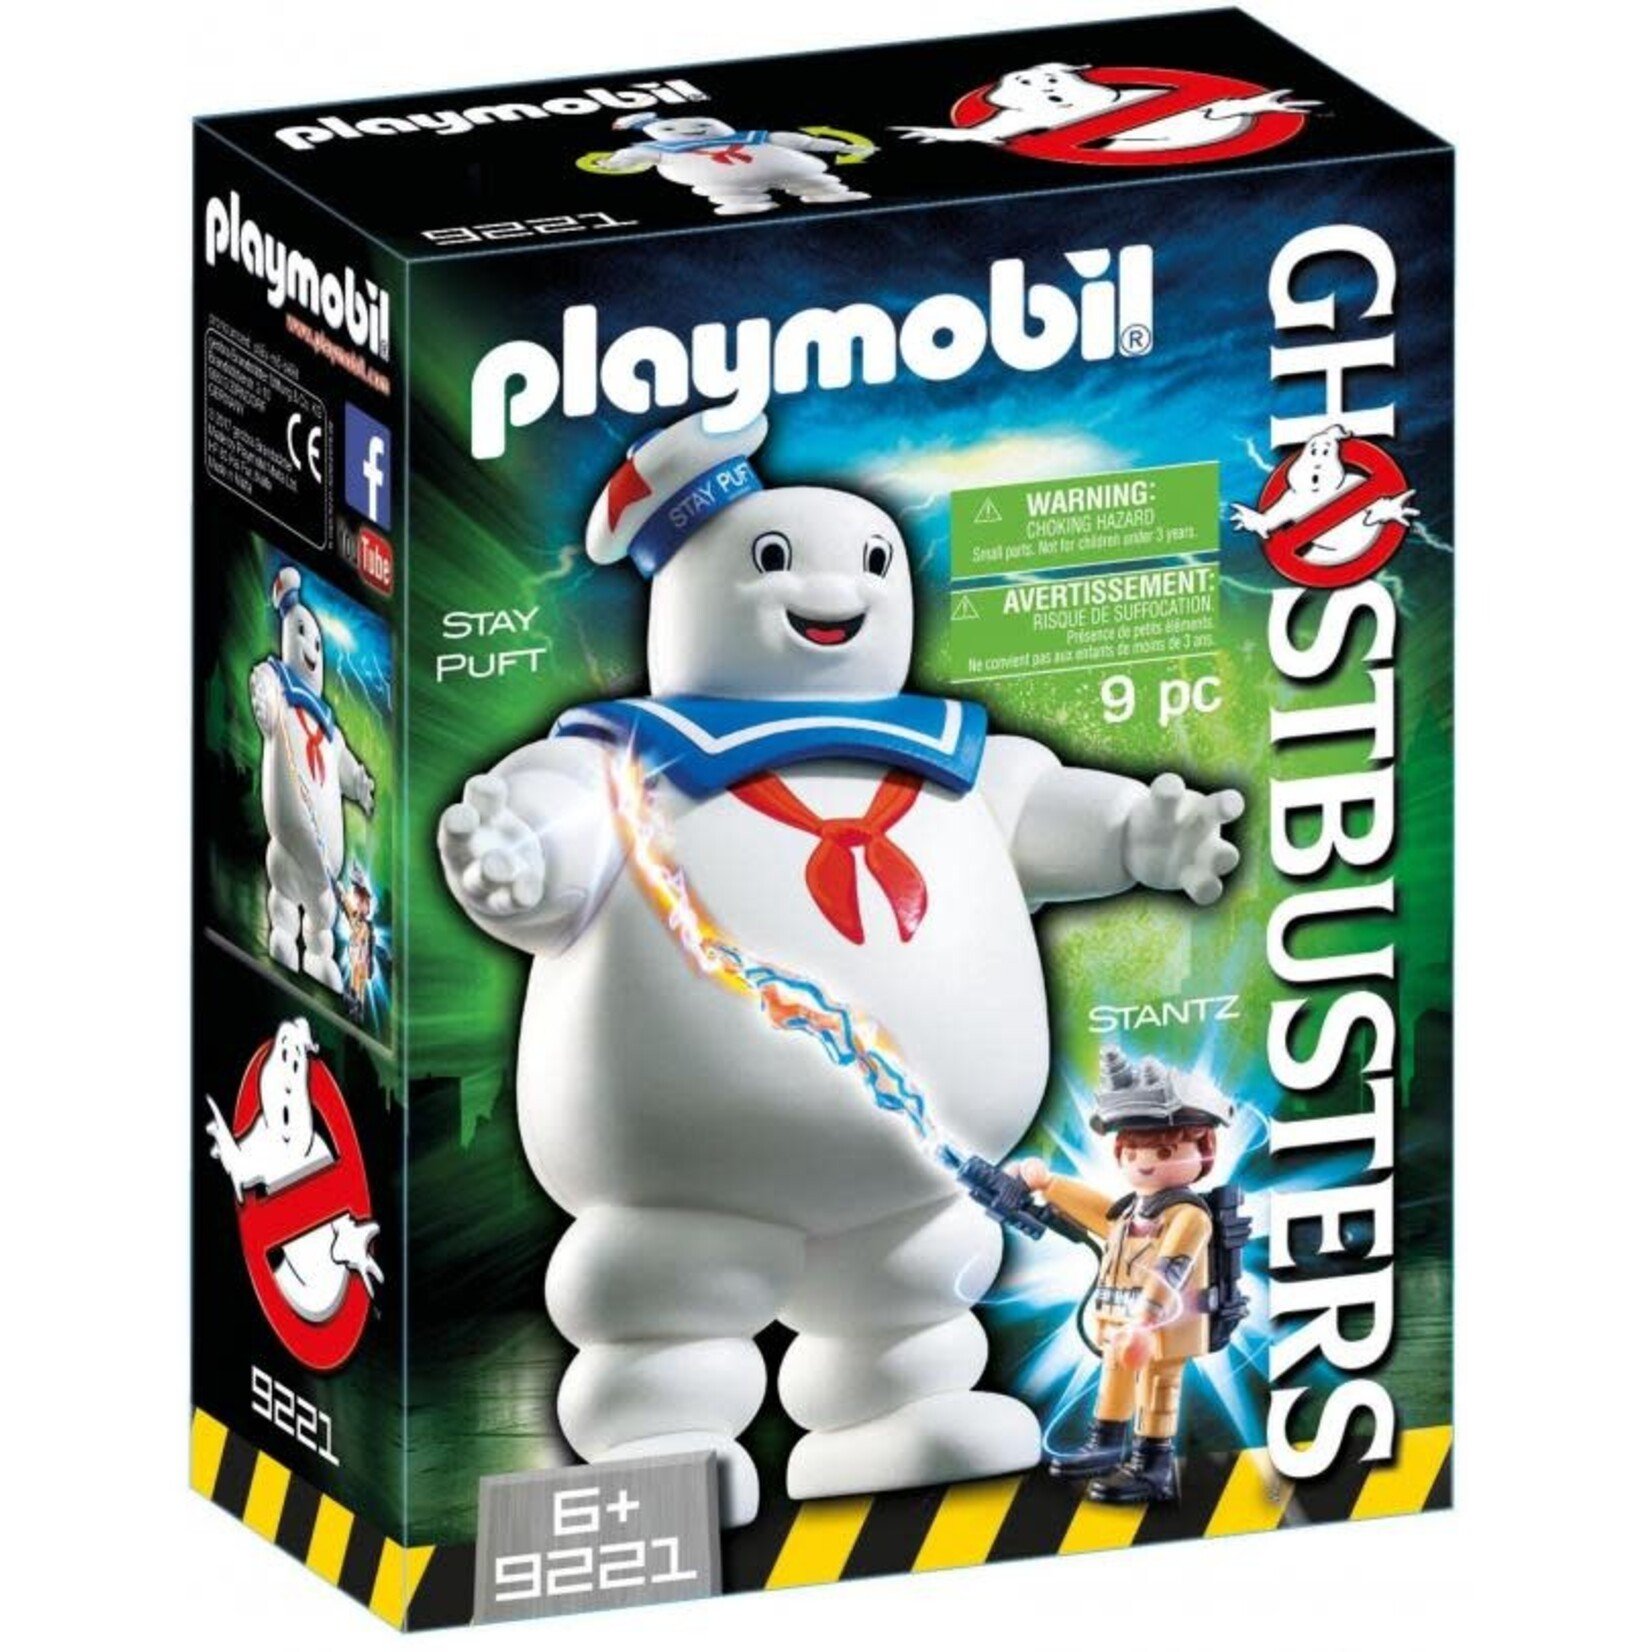 GHOSTBUSTERS - Ghost Stay Puft and Stantz 'PLAYMOBIL' Version 9221